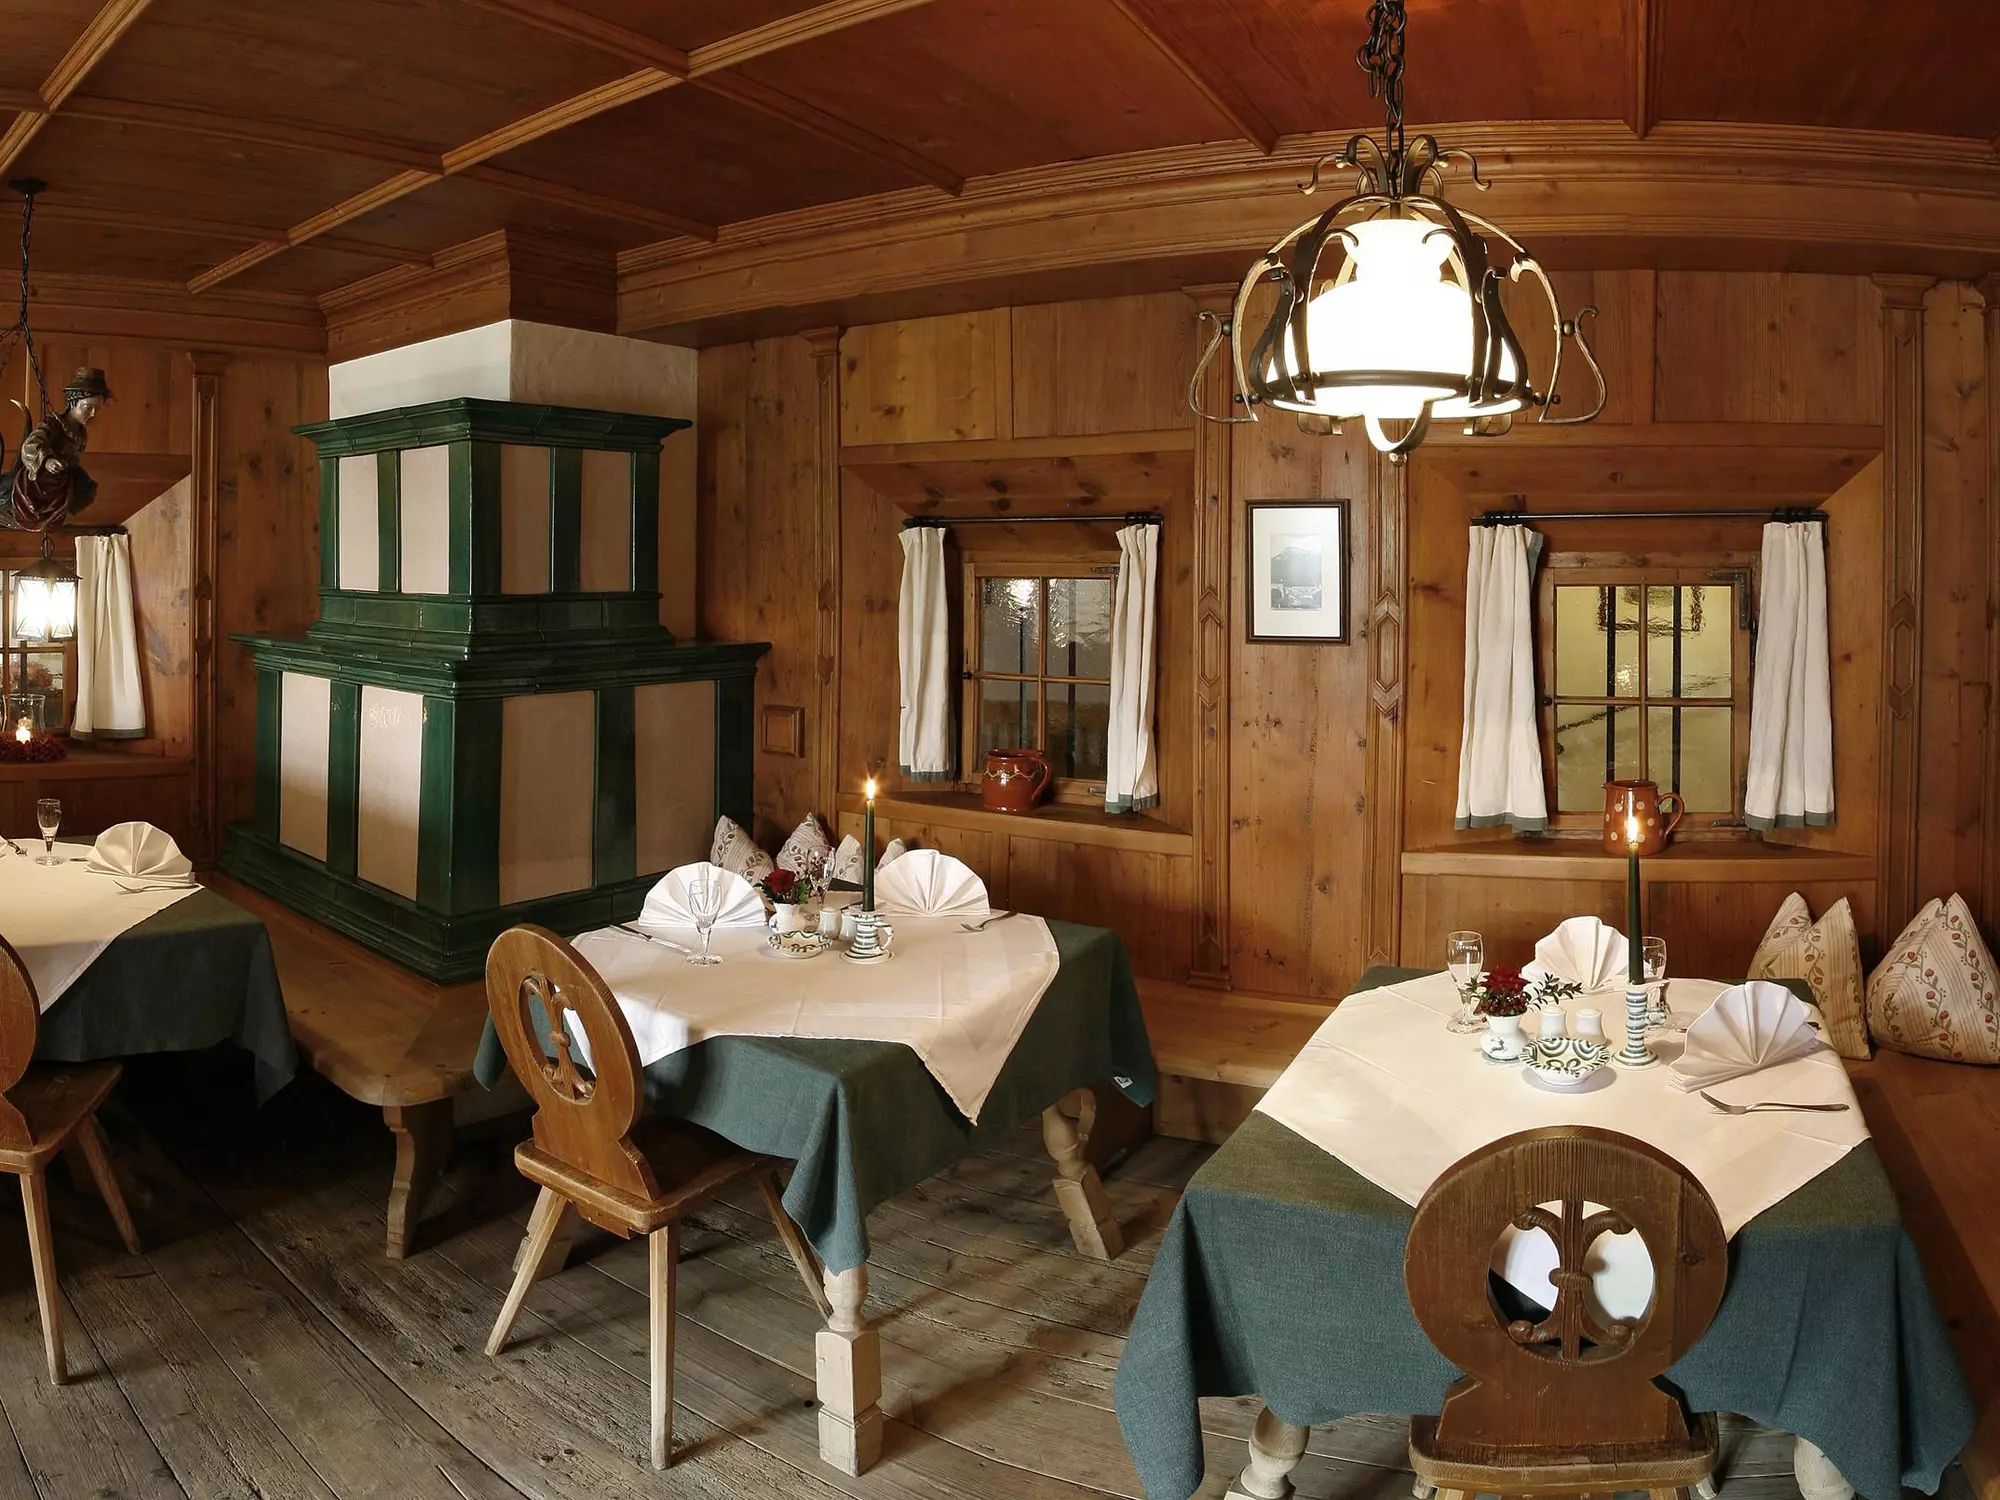 Antique, wood-paneled dining room with set tables at restaurant Gasthof Herrnhaus in Brixlegg in Tyrol